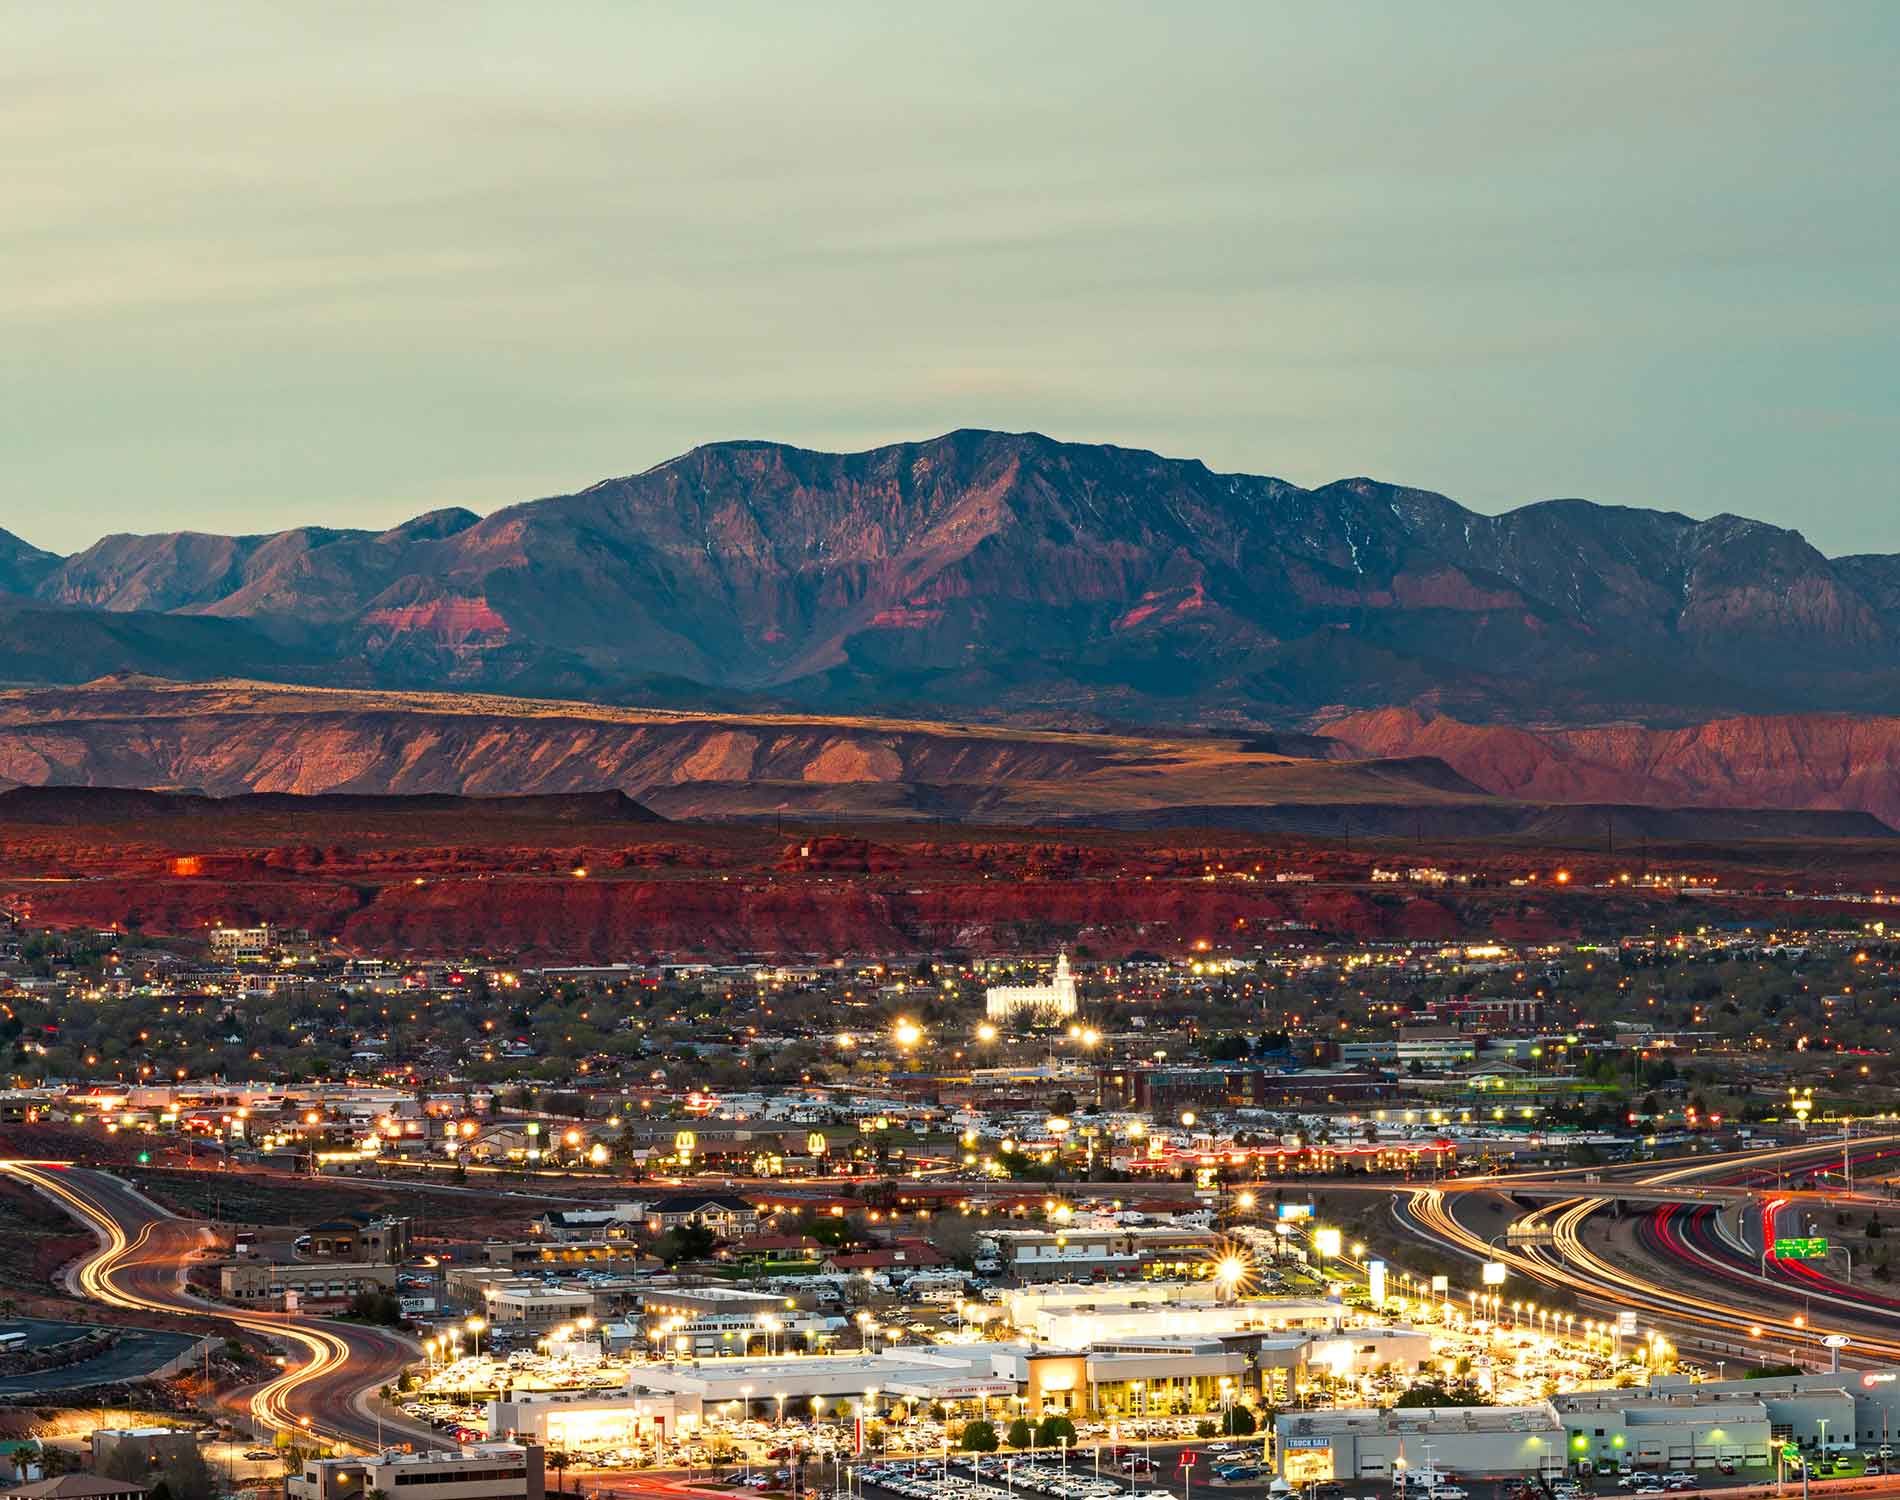 11-facts-about-urban-development-in-st-george-utah